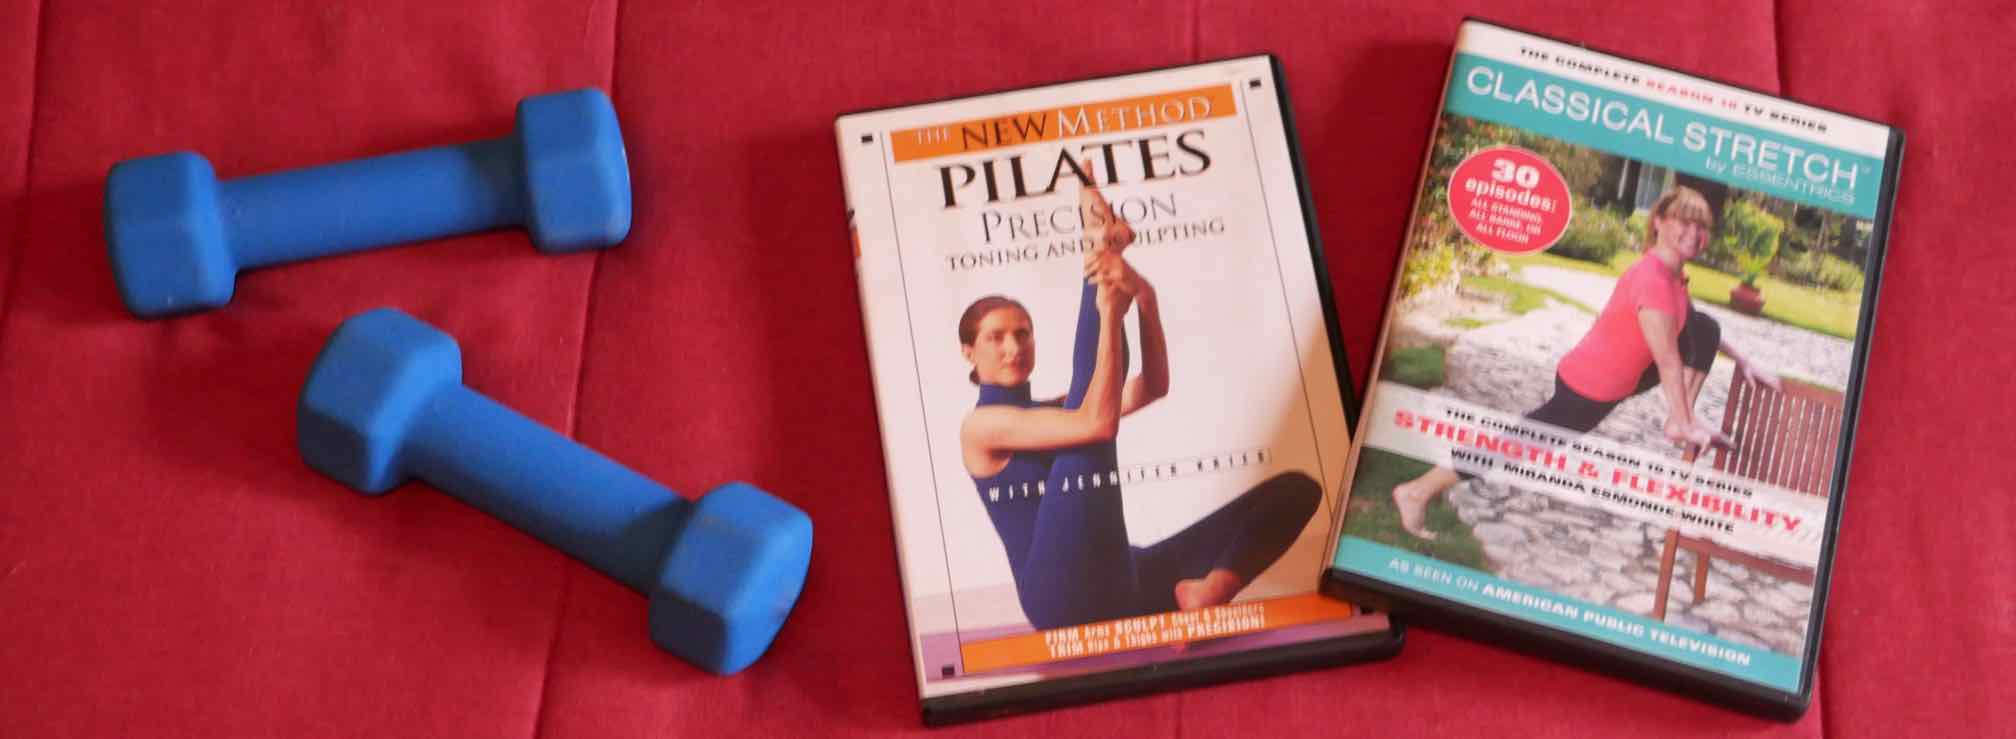 exercise weights and 2 exercise DVDs